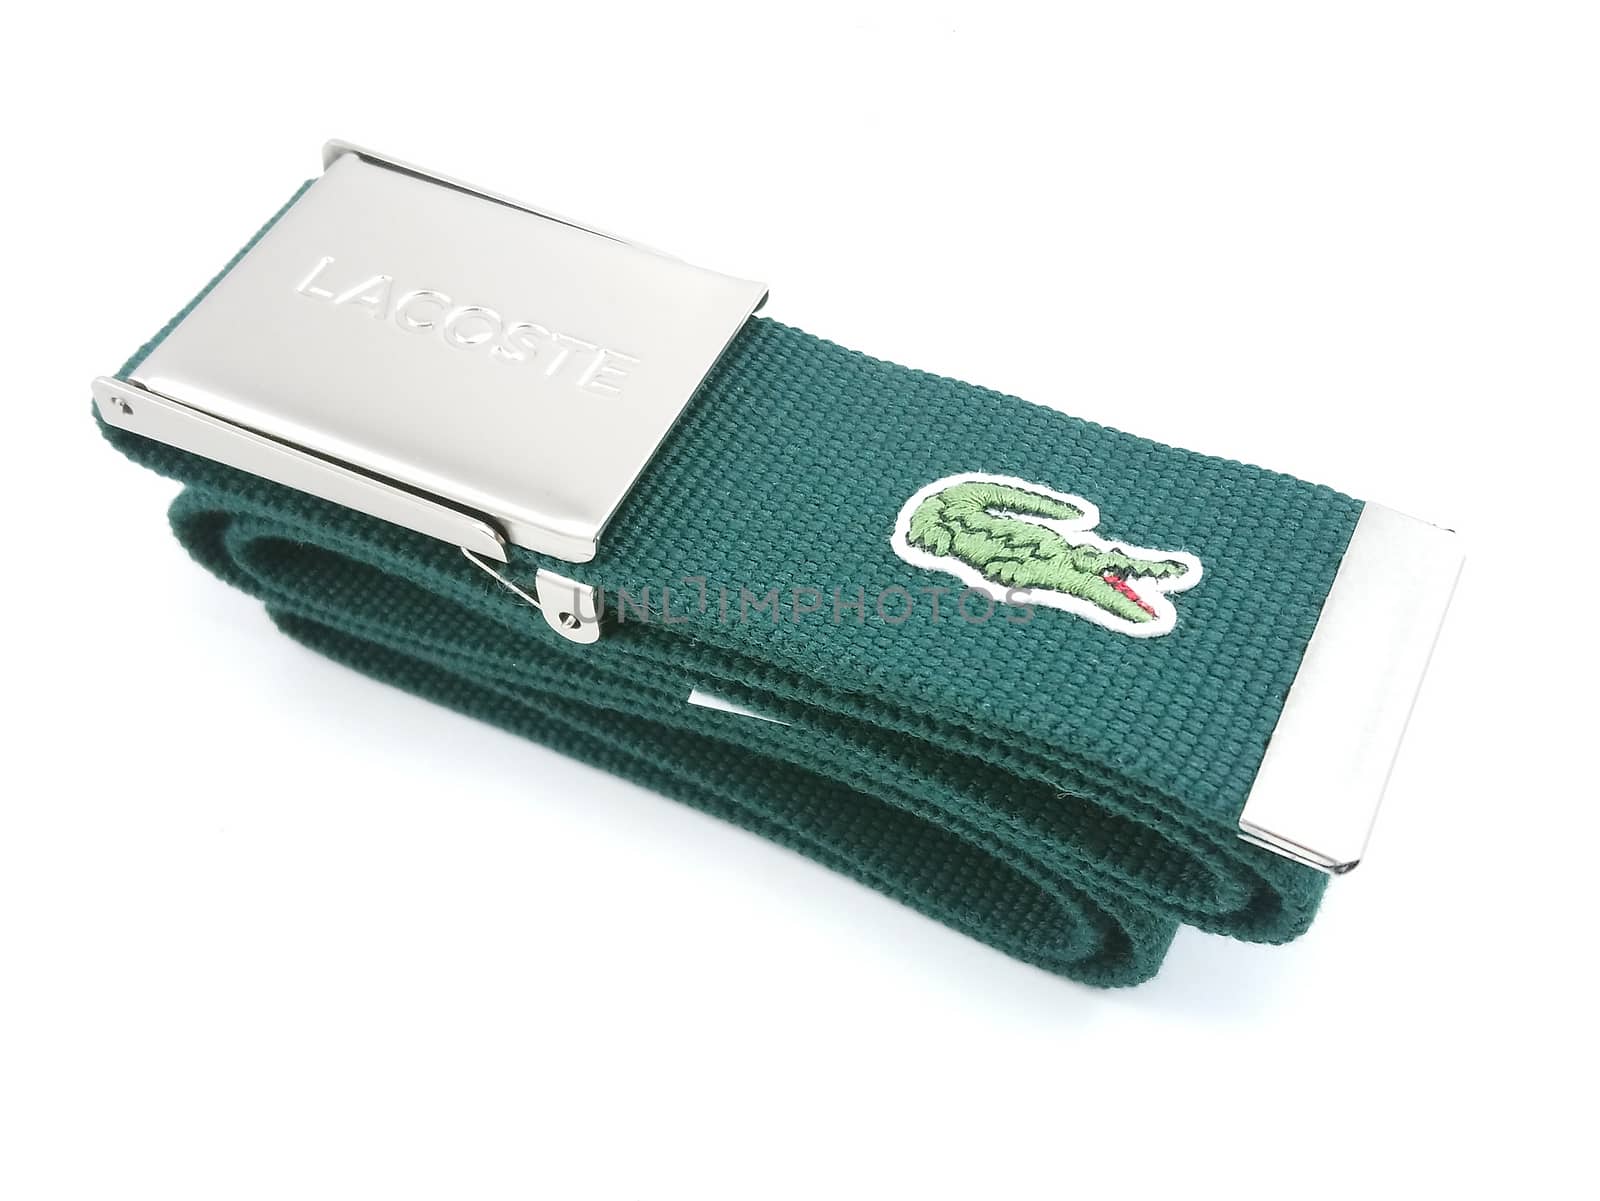 Lacoste mens belt green color with metal buckle in Manila, Phili by imwaltersy